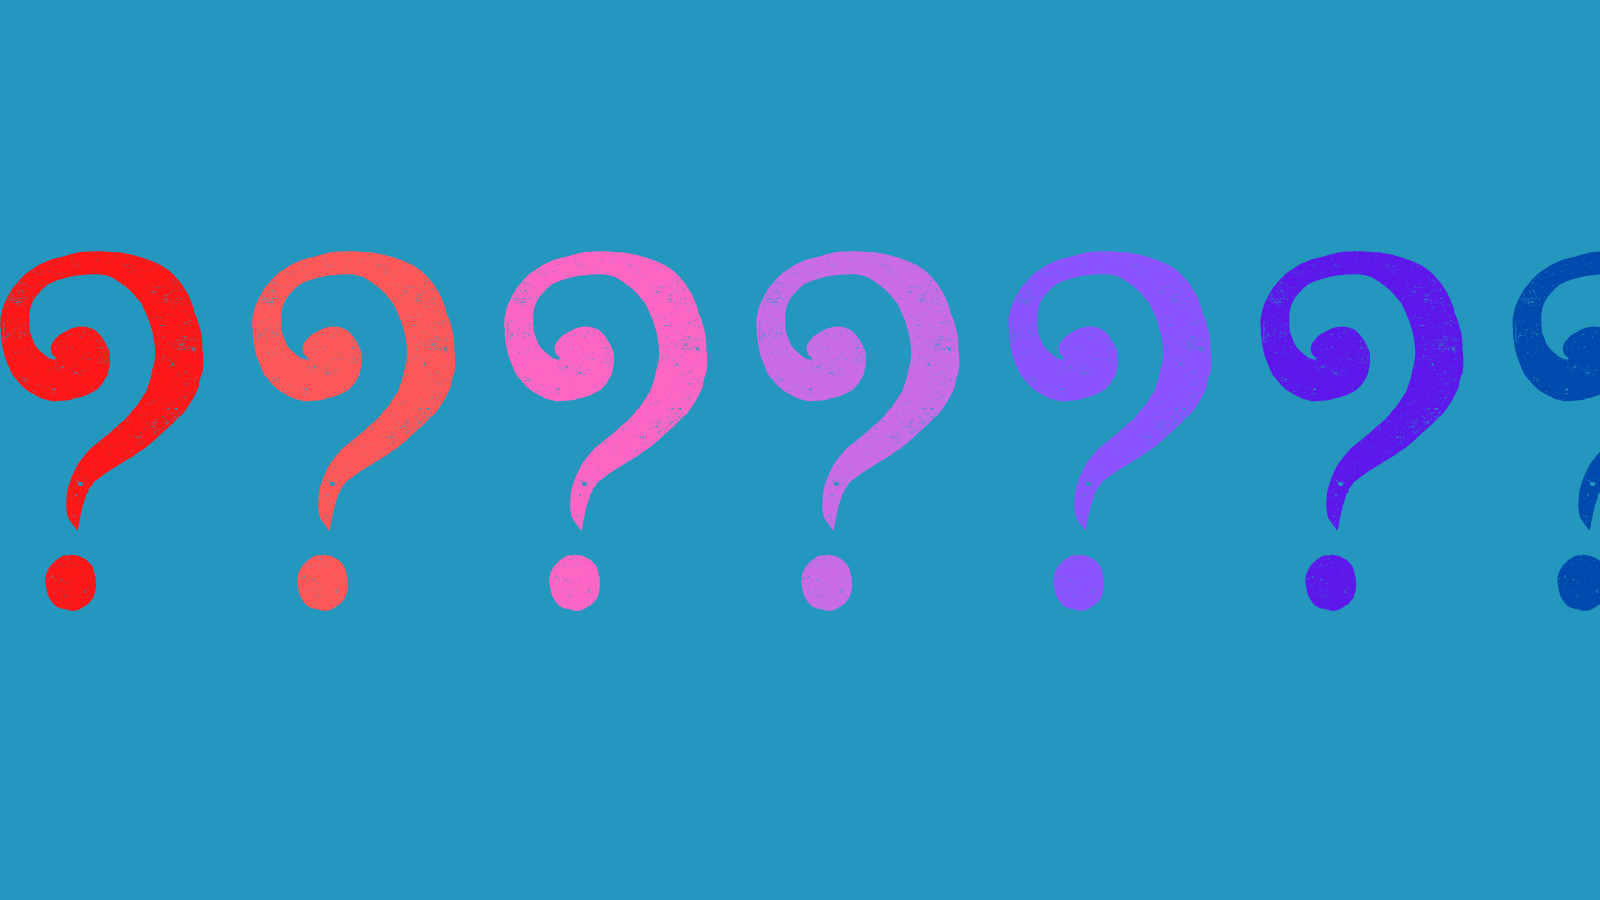 Question marks in various colors